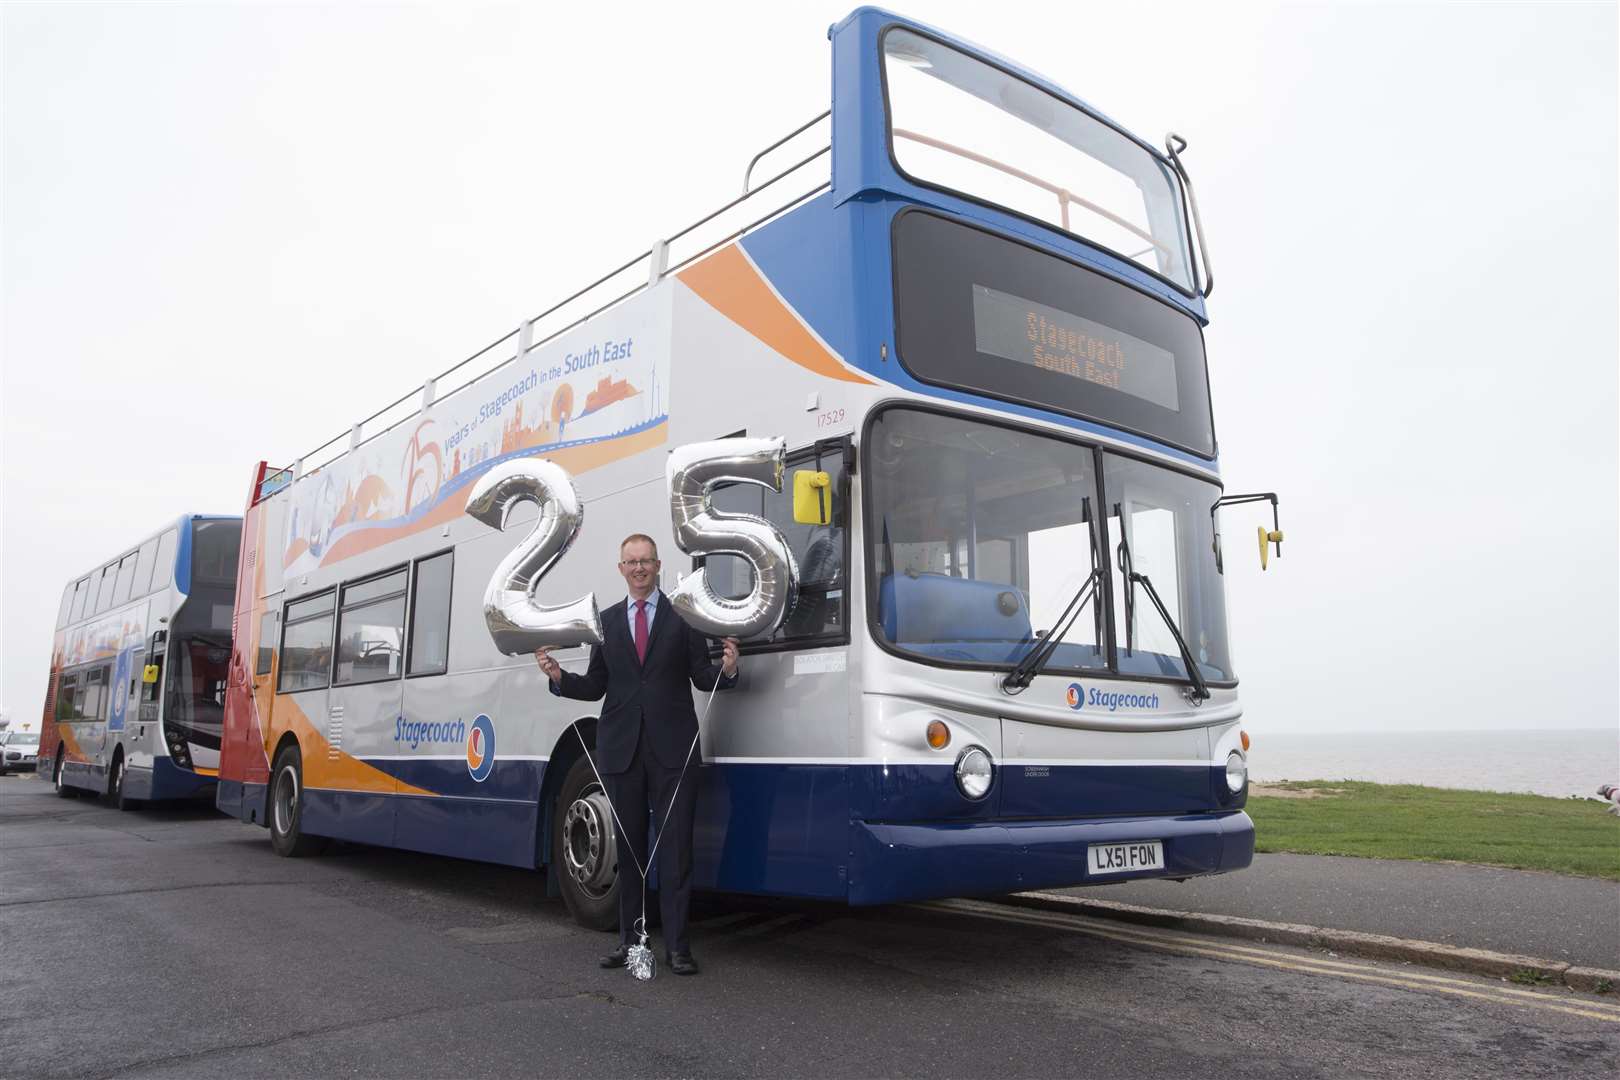 Stagecoach has been marking its 25th anniversary this year